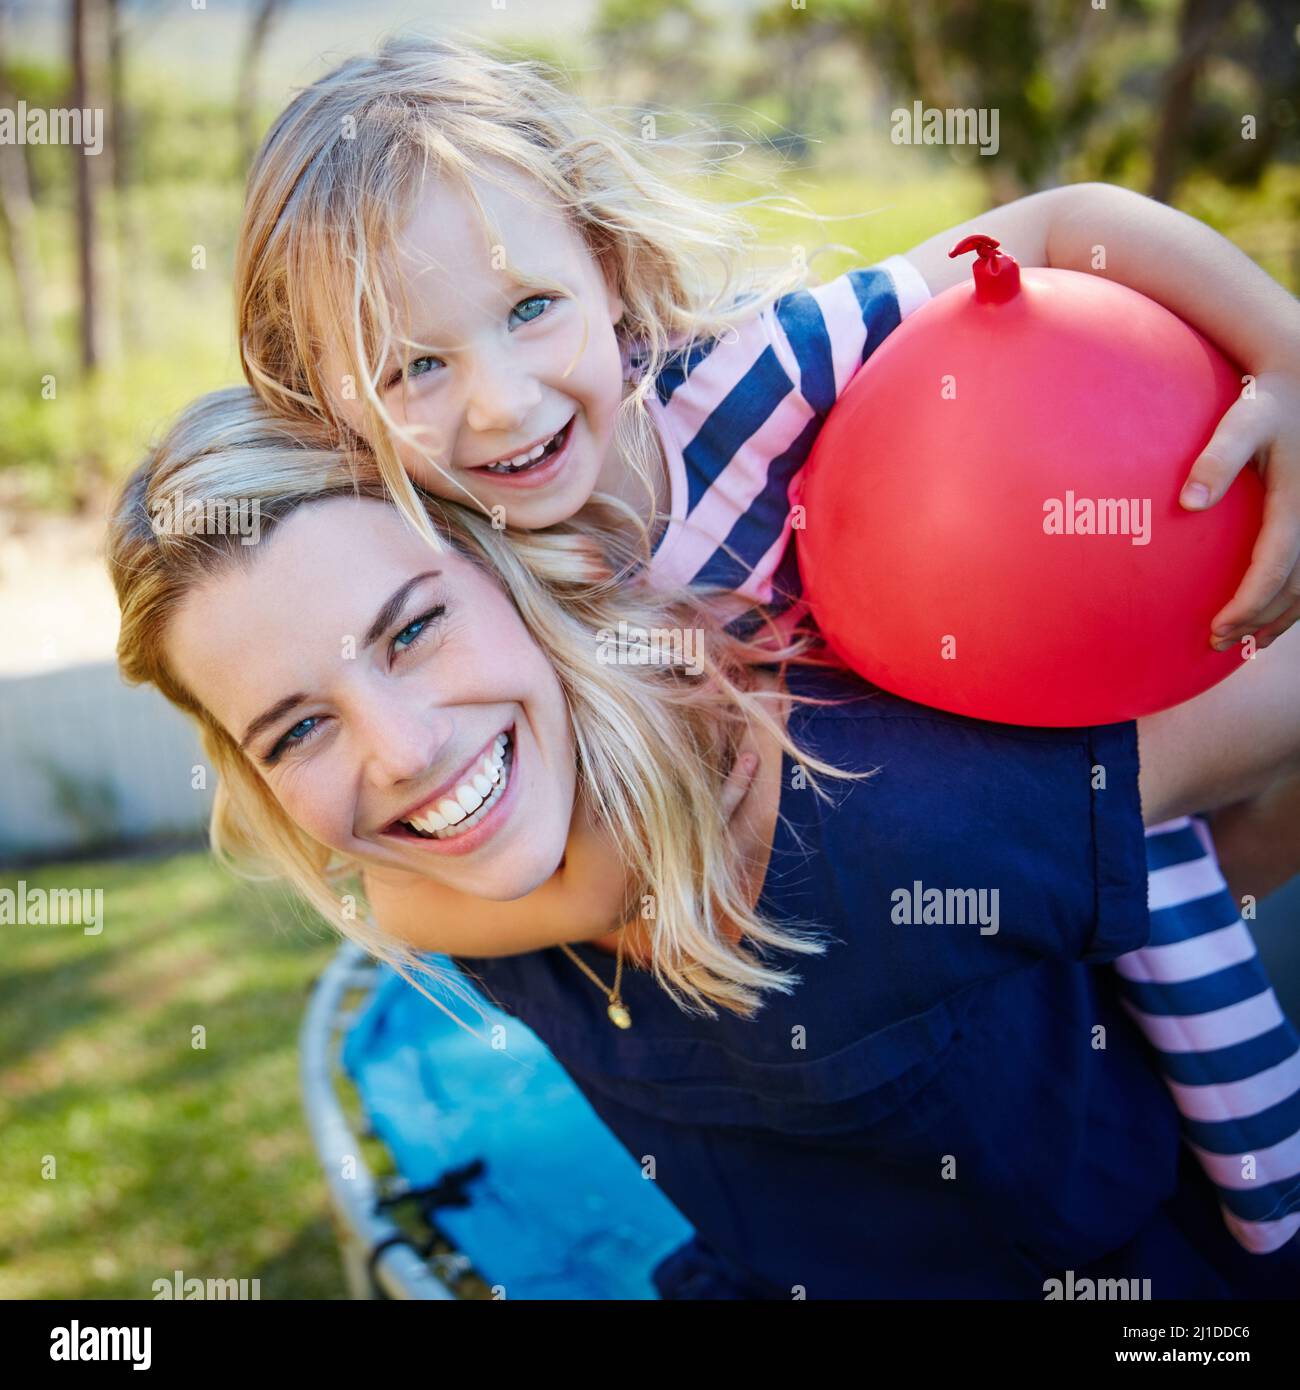 Theres nothing better than best friends spending time together. Portrait of a mother and daughter enjoying a day outdoors together. Stock Photo